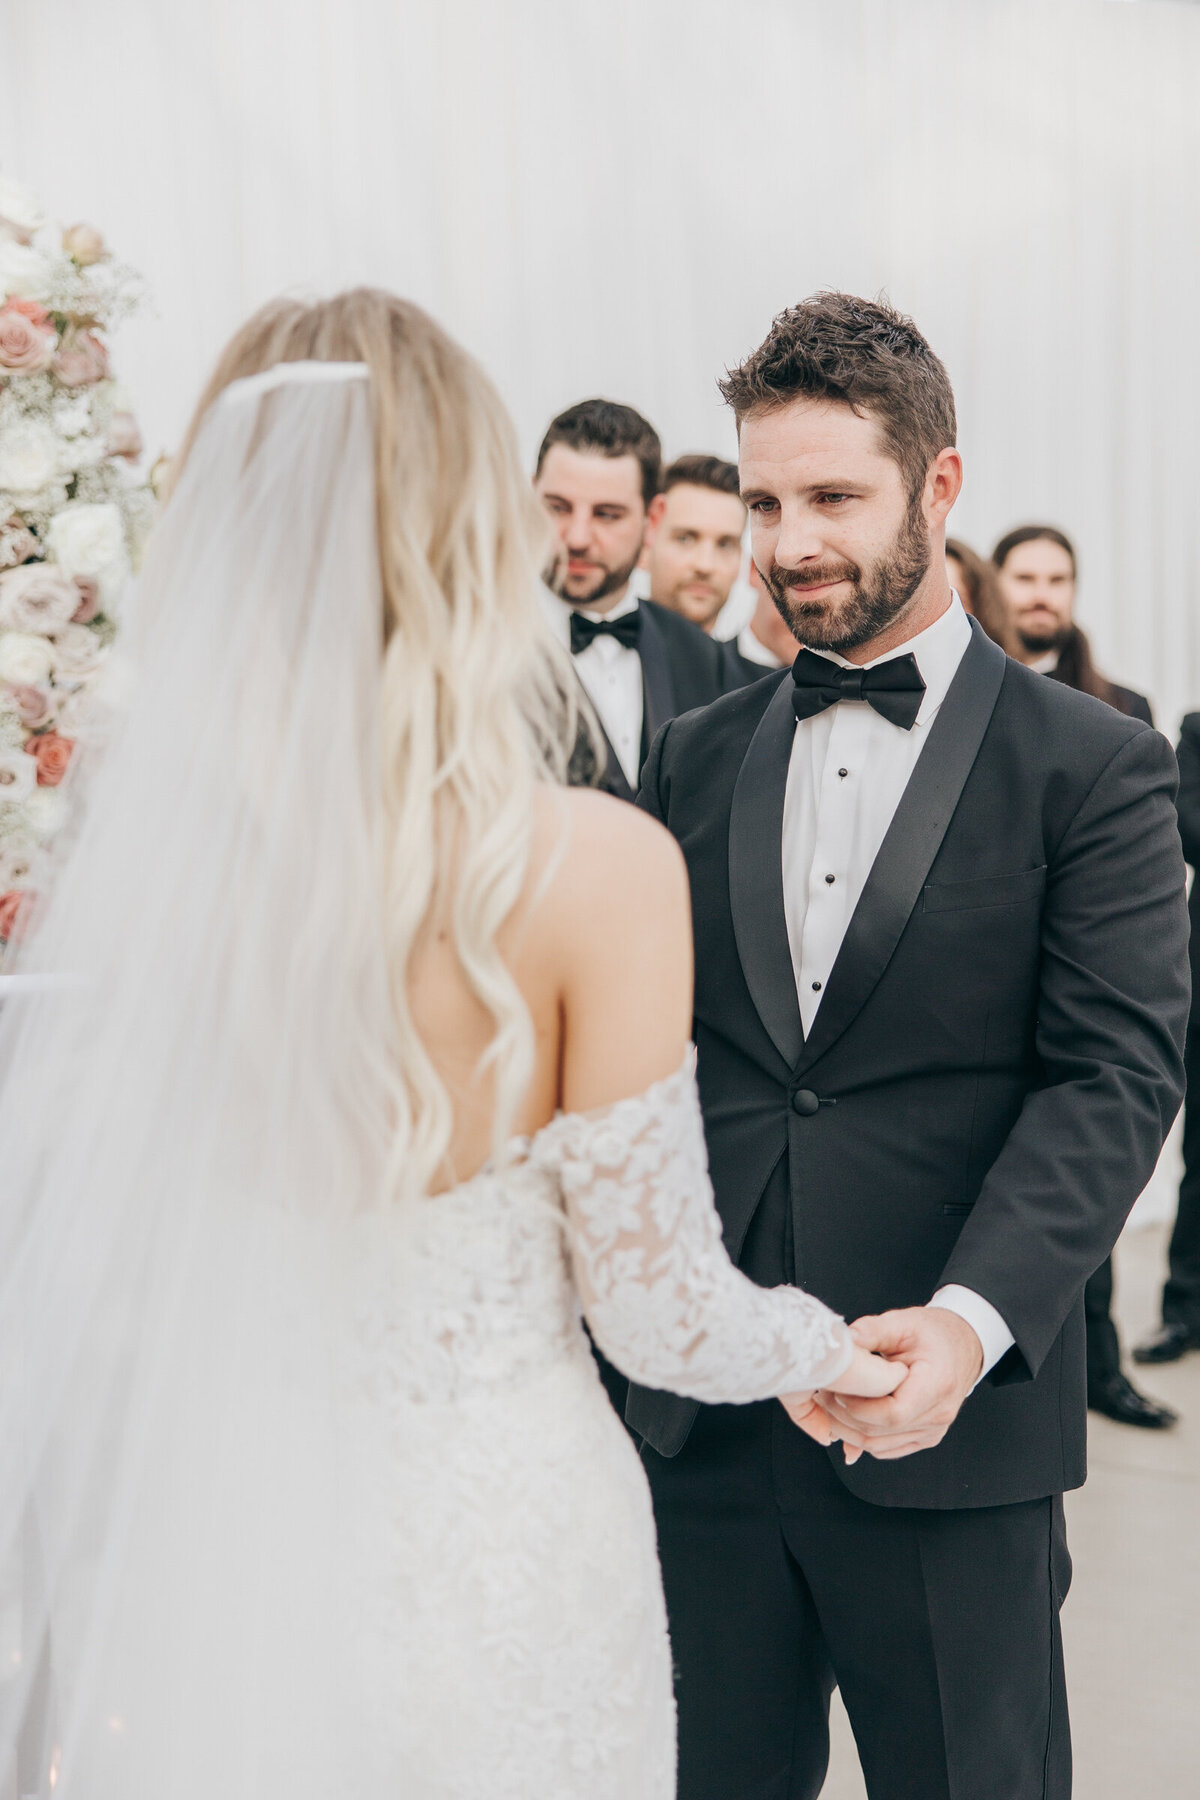 Candid moment of groom looking into bride's eye during luxurious wedding ceremony